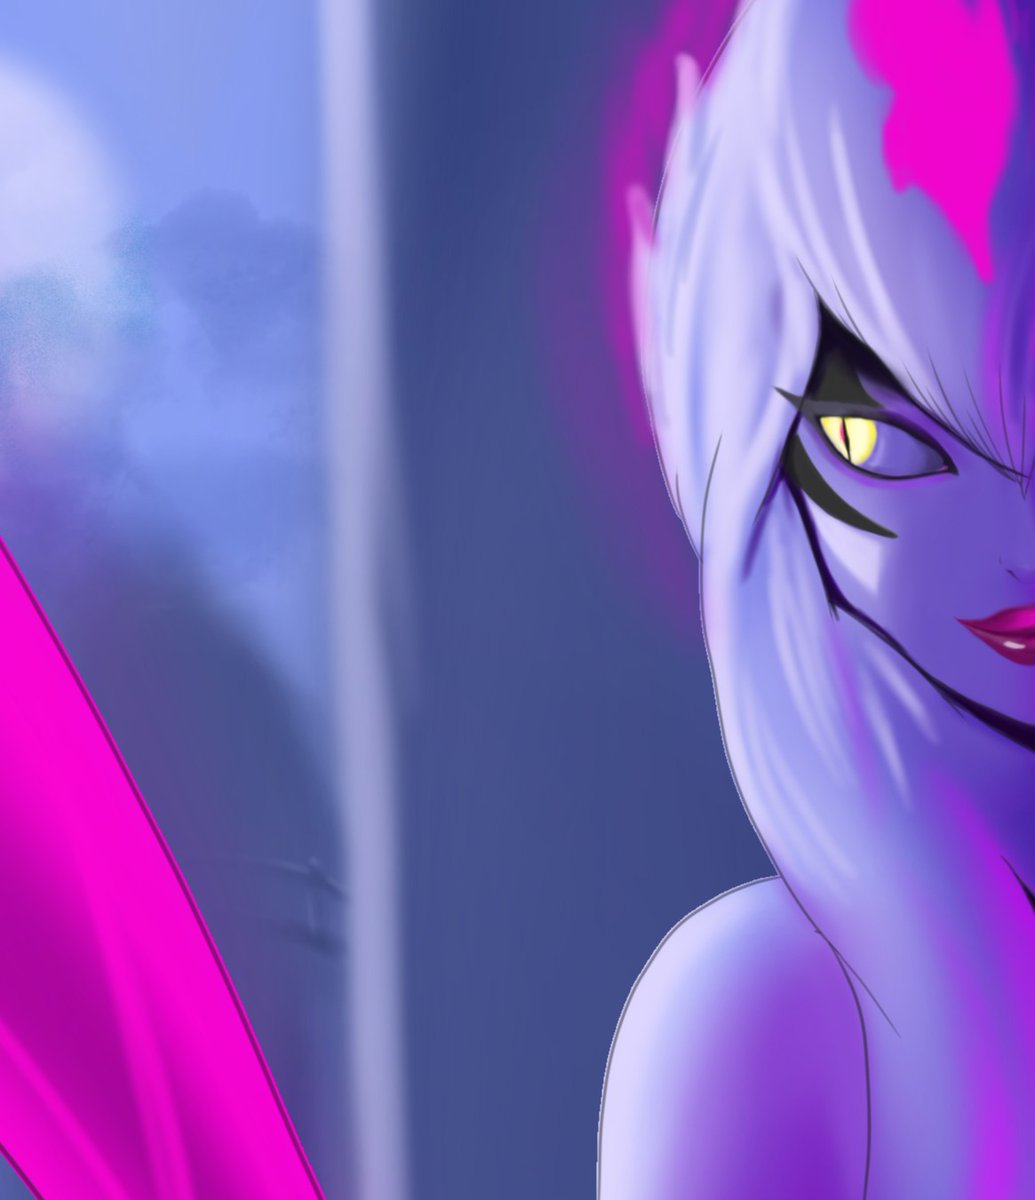 sorry for not posting for a while but here is just a little teaser on what I'm working on, The fanart of Evelynn

#art #artgallery #illustration #digitalart #digitalartist #artwork #animeart #LeagueOfLegendsFanArt #sketch #leagueoflegendsart #LeagueOne #fanart #doodle #artmoots